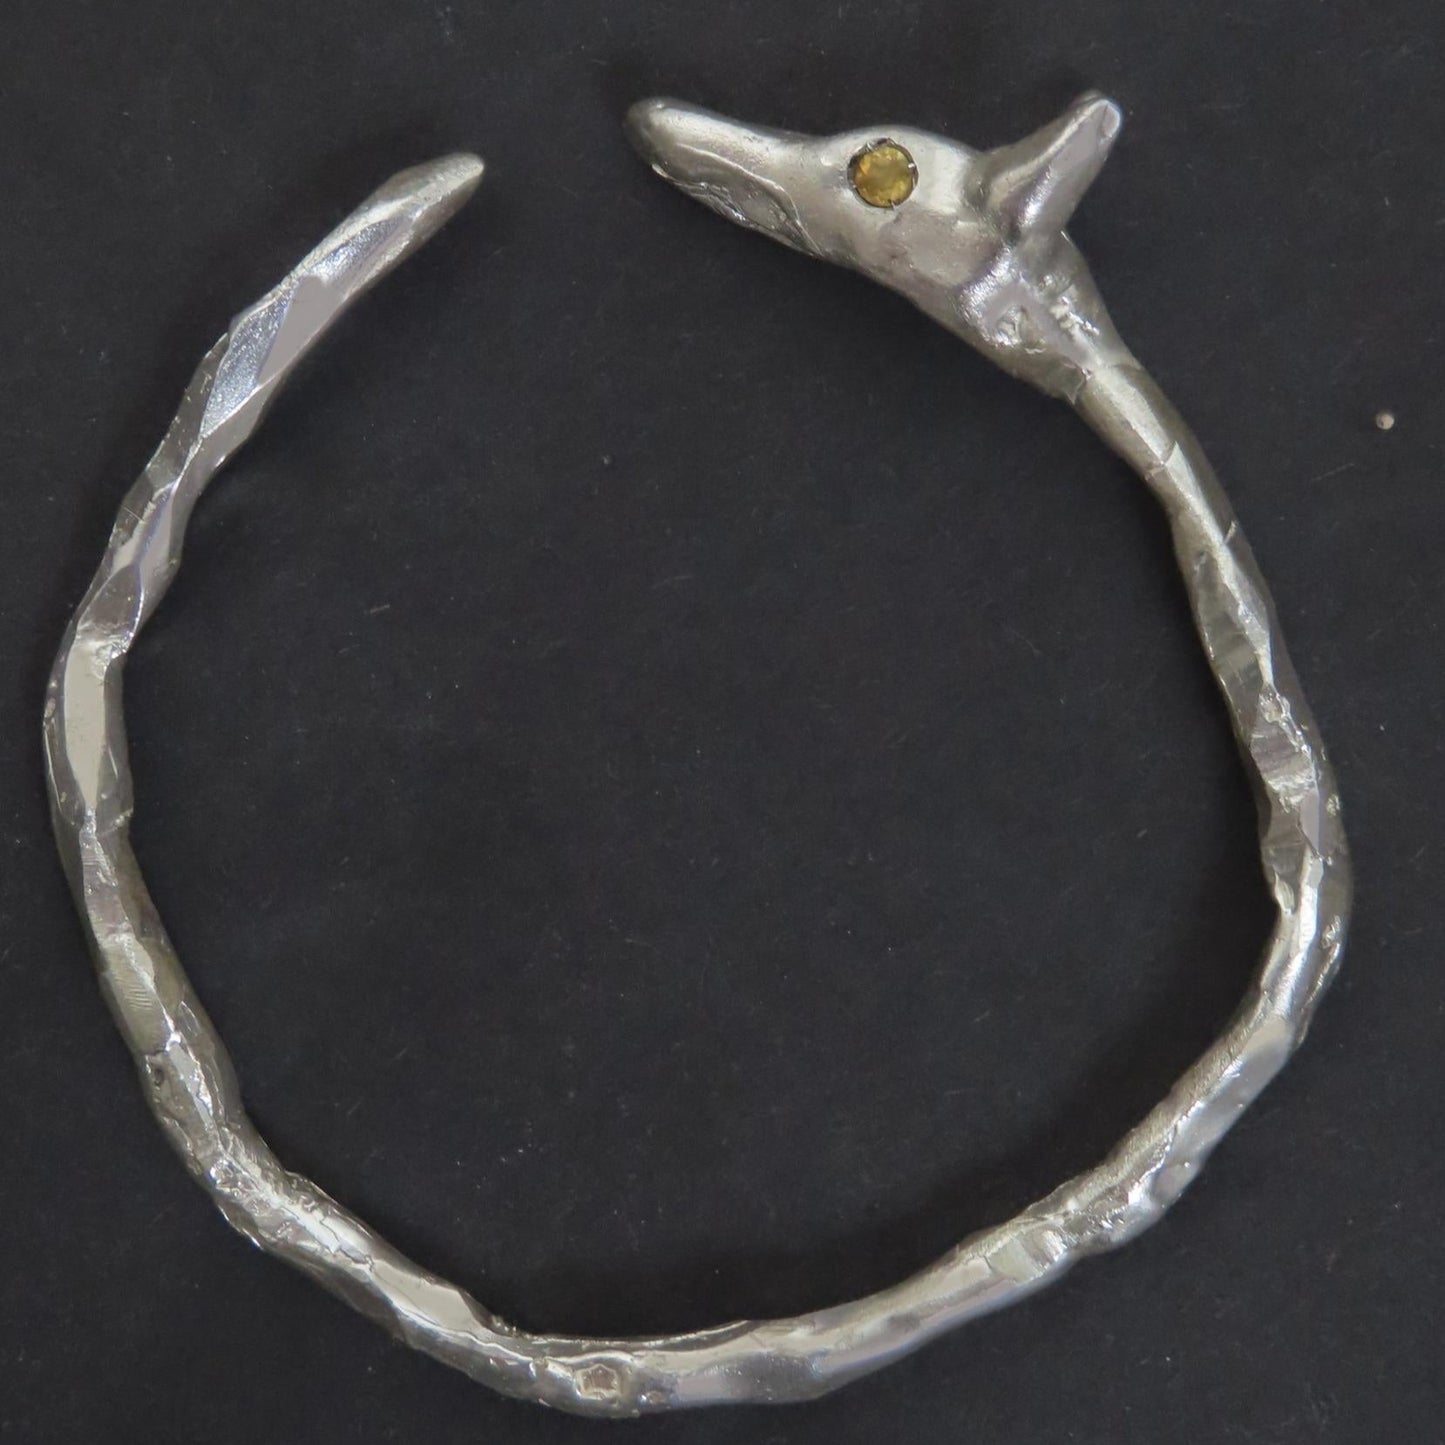 handmade silver bangle sculpted to look like a jackal with citrine eyes